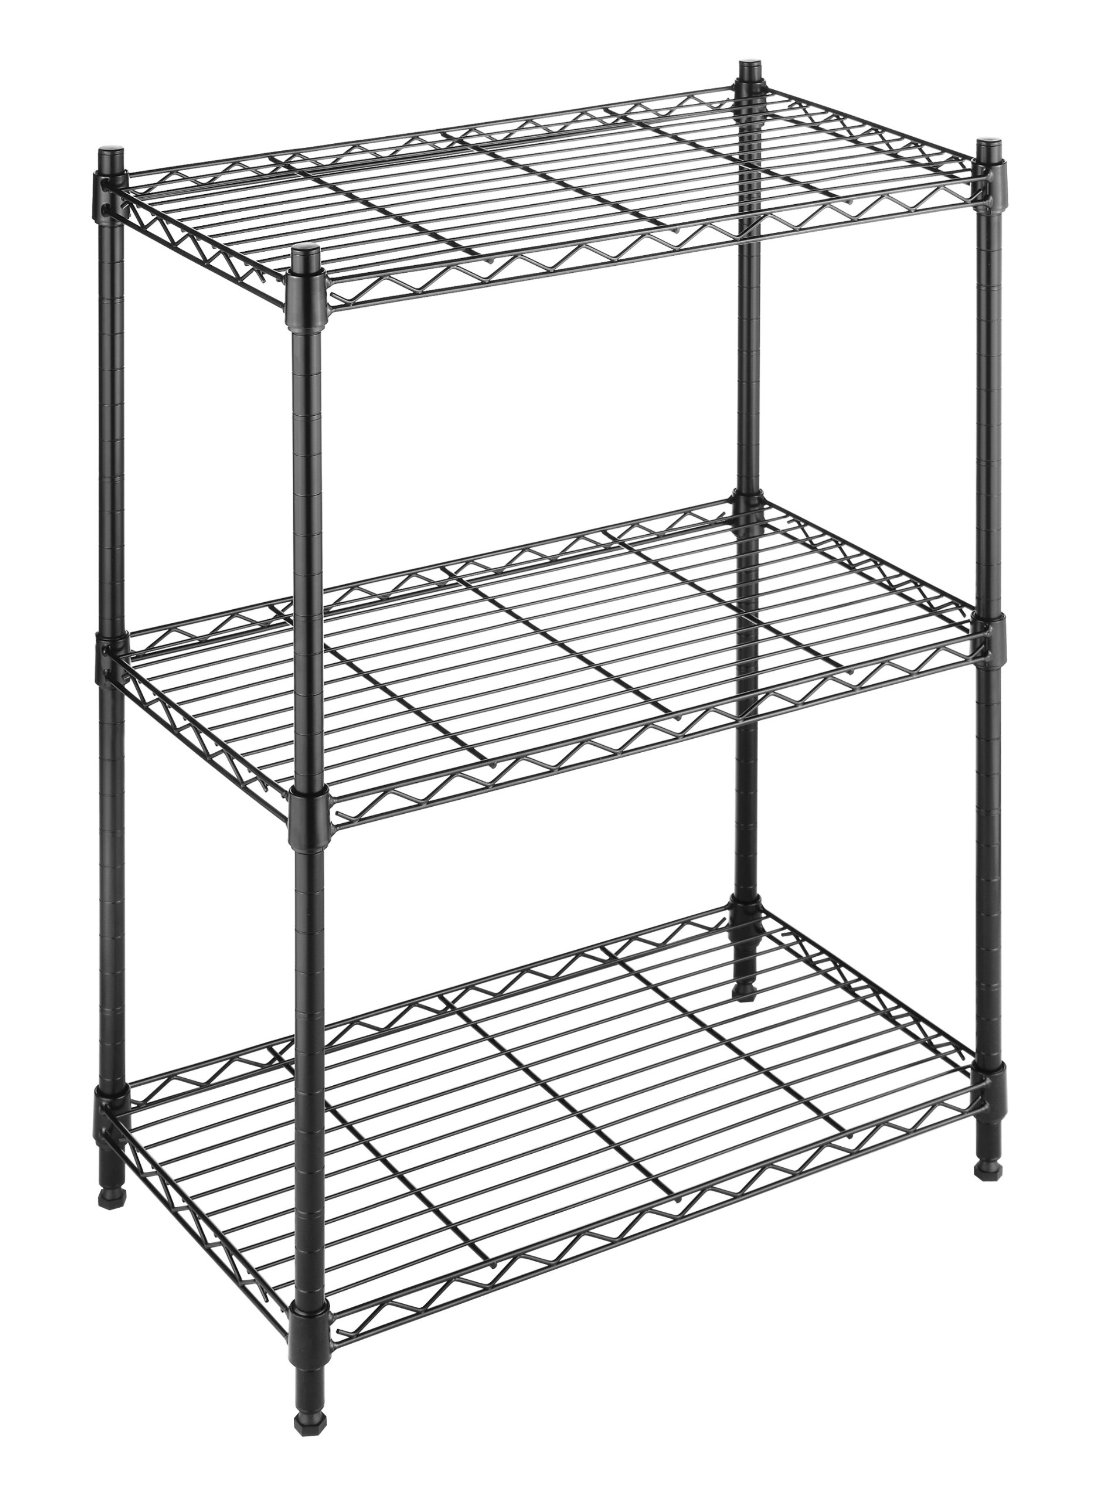 Amazon – Three Tier Shelving For Just $23.16 (54% OFF)!!! and a 6 Quart Slow Cooker For Just $24